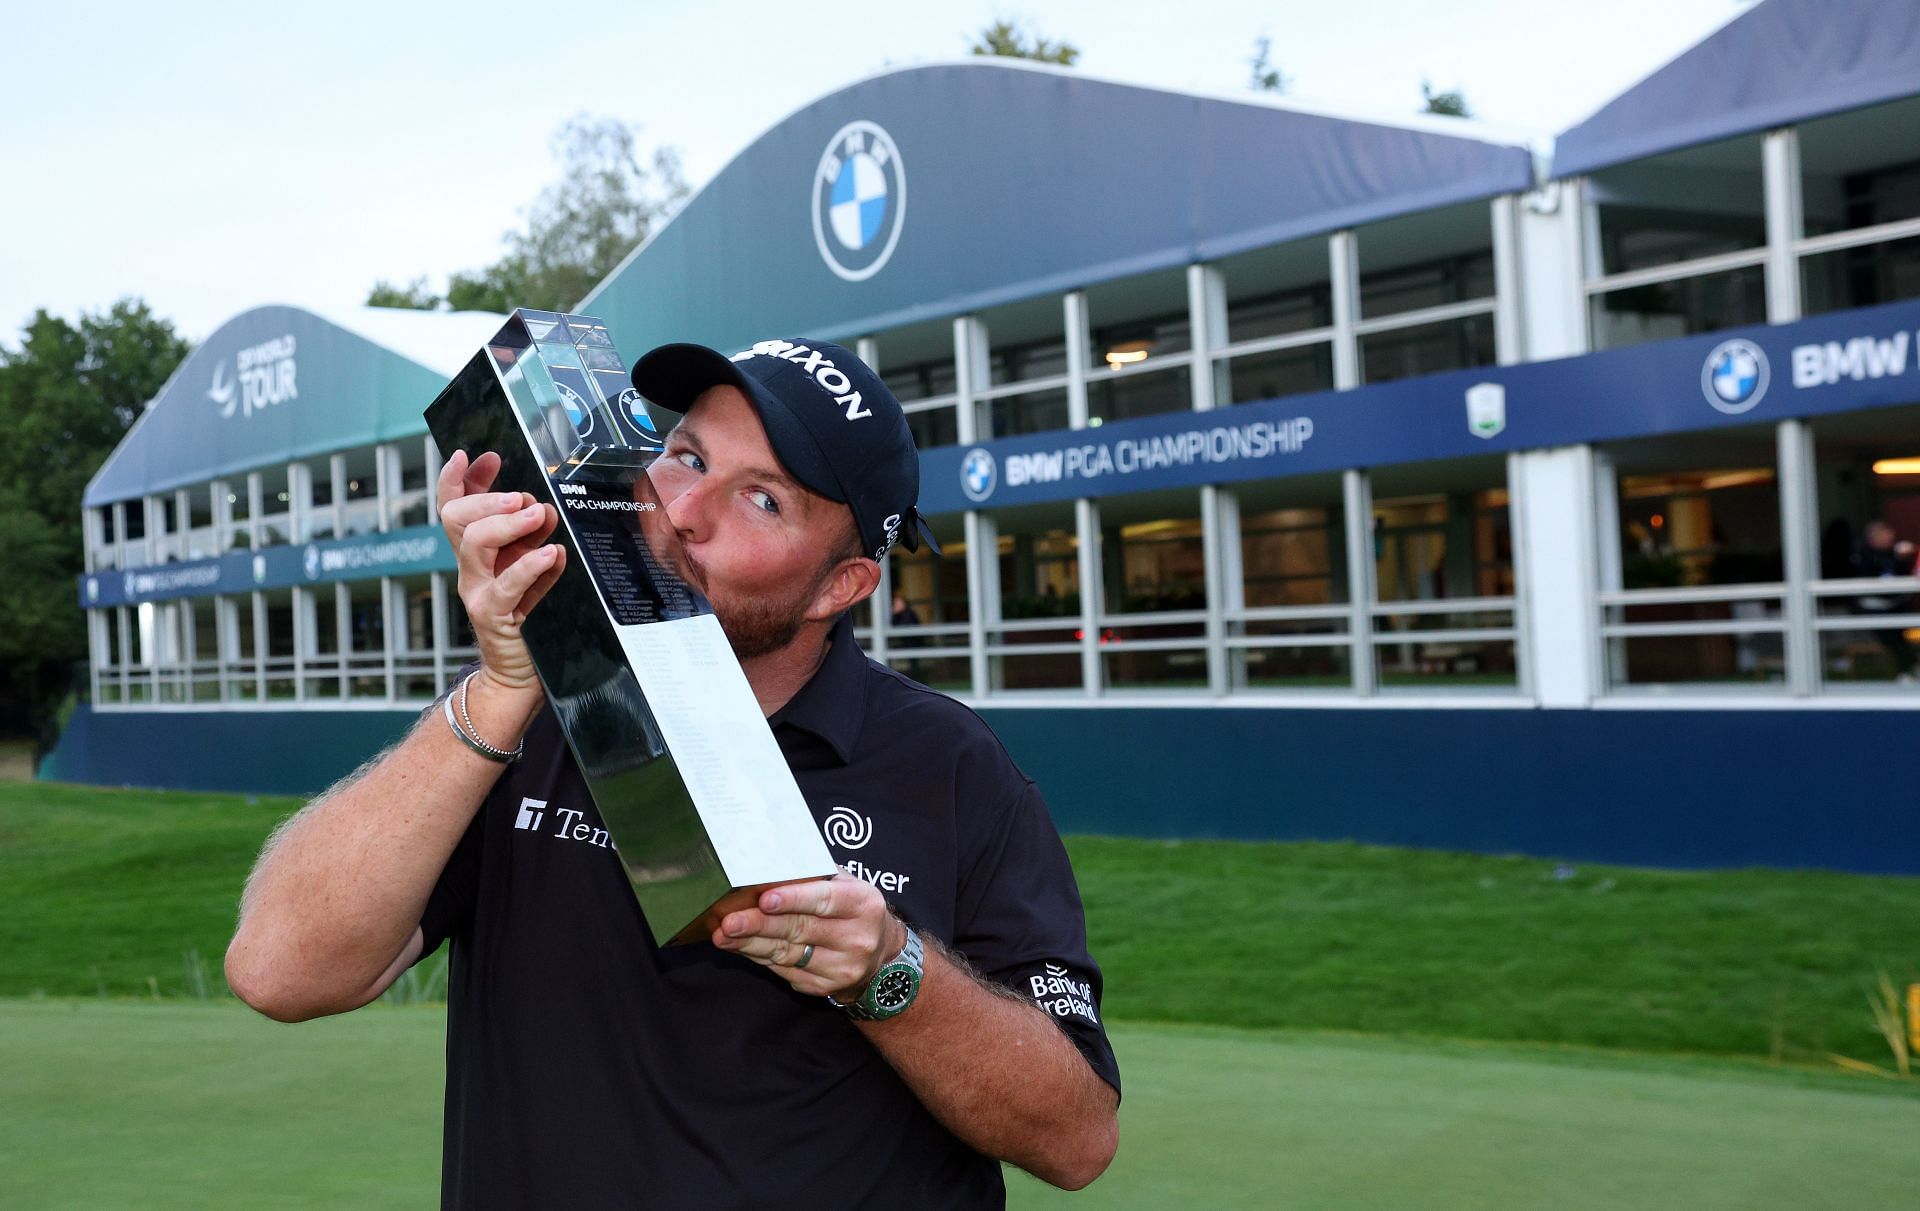 2023 BMW PGA Championship field and player rankings explored